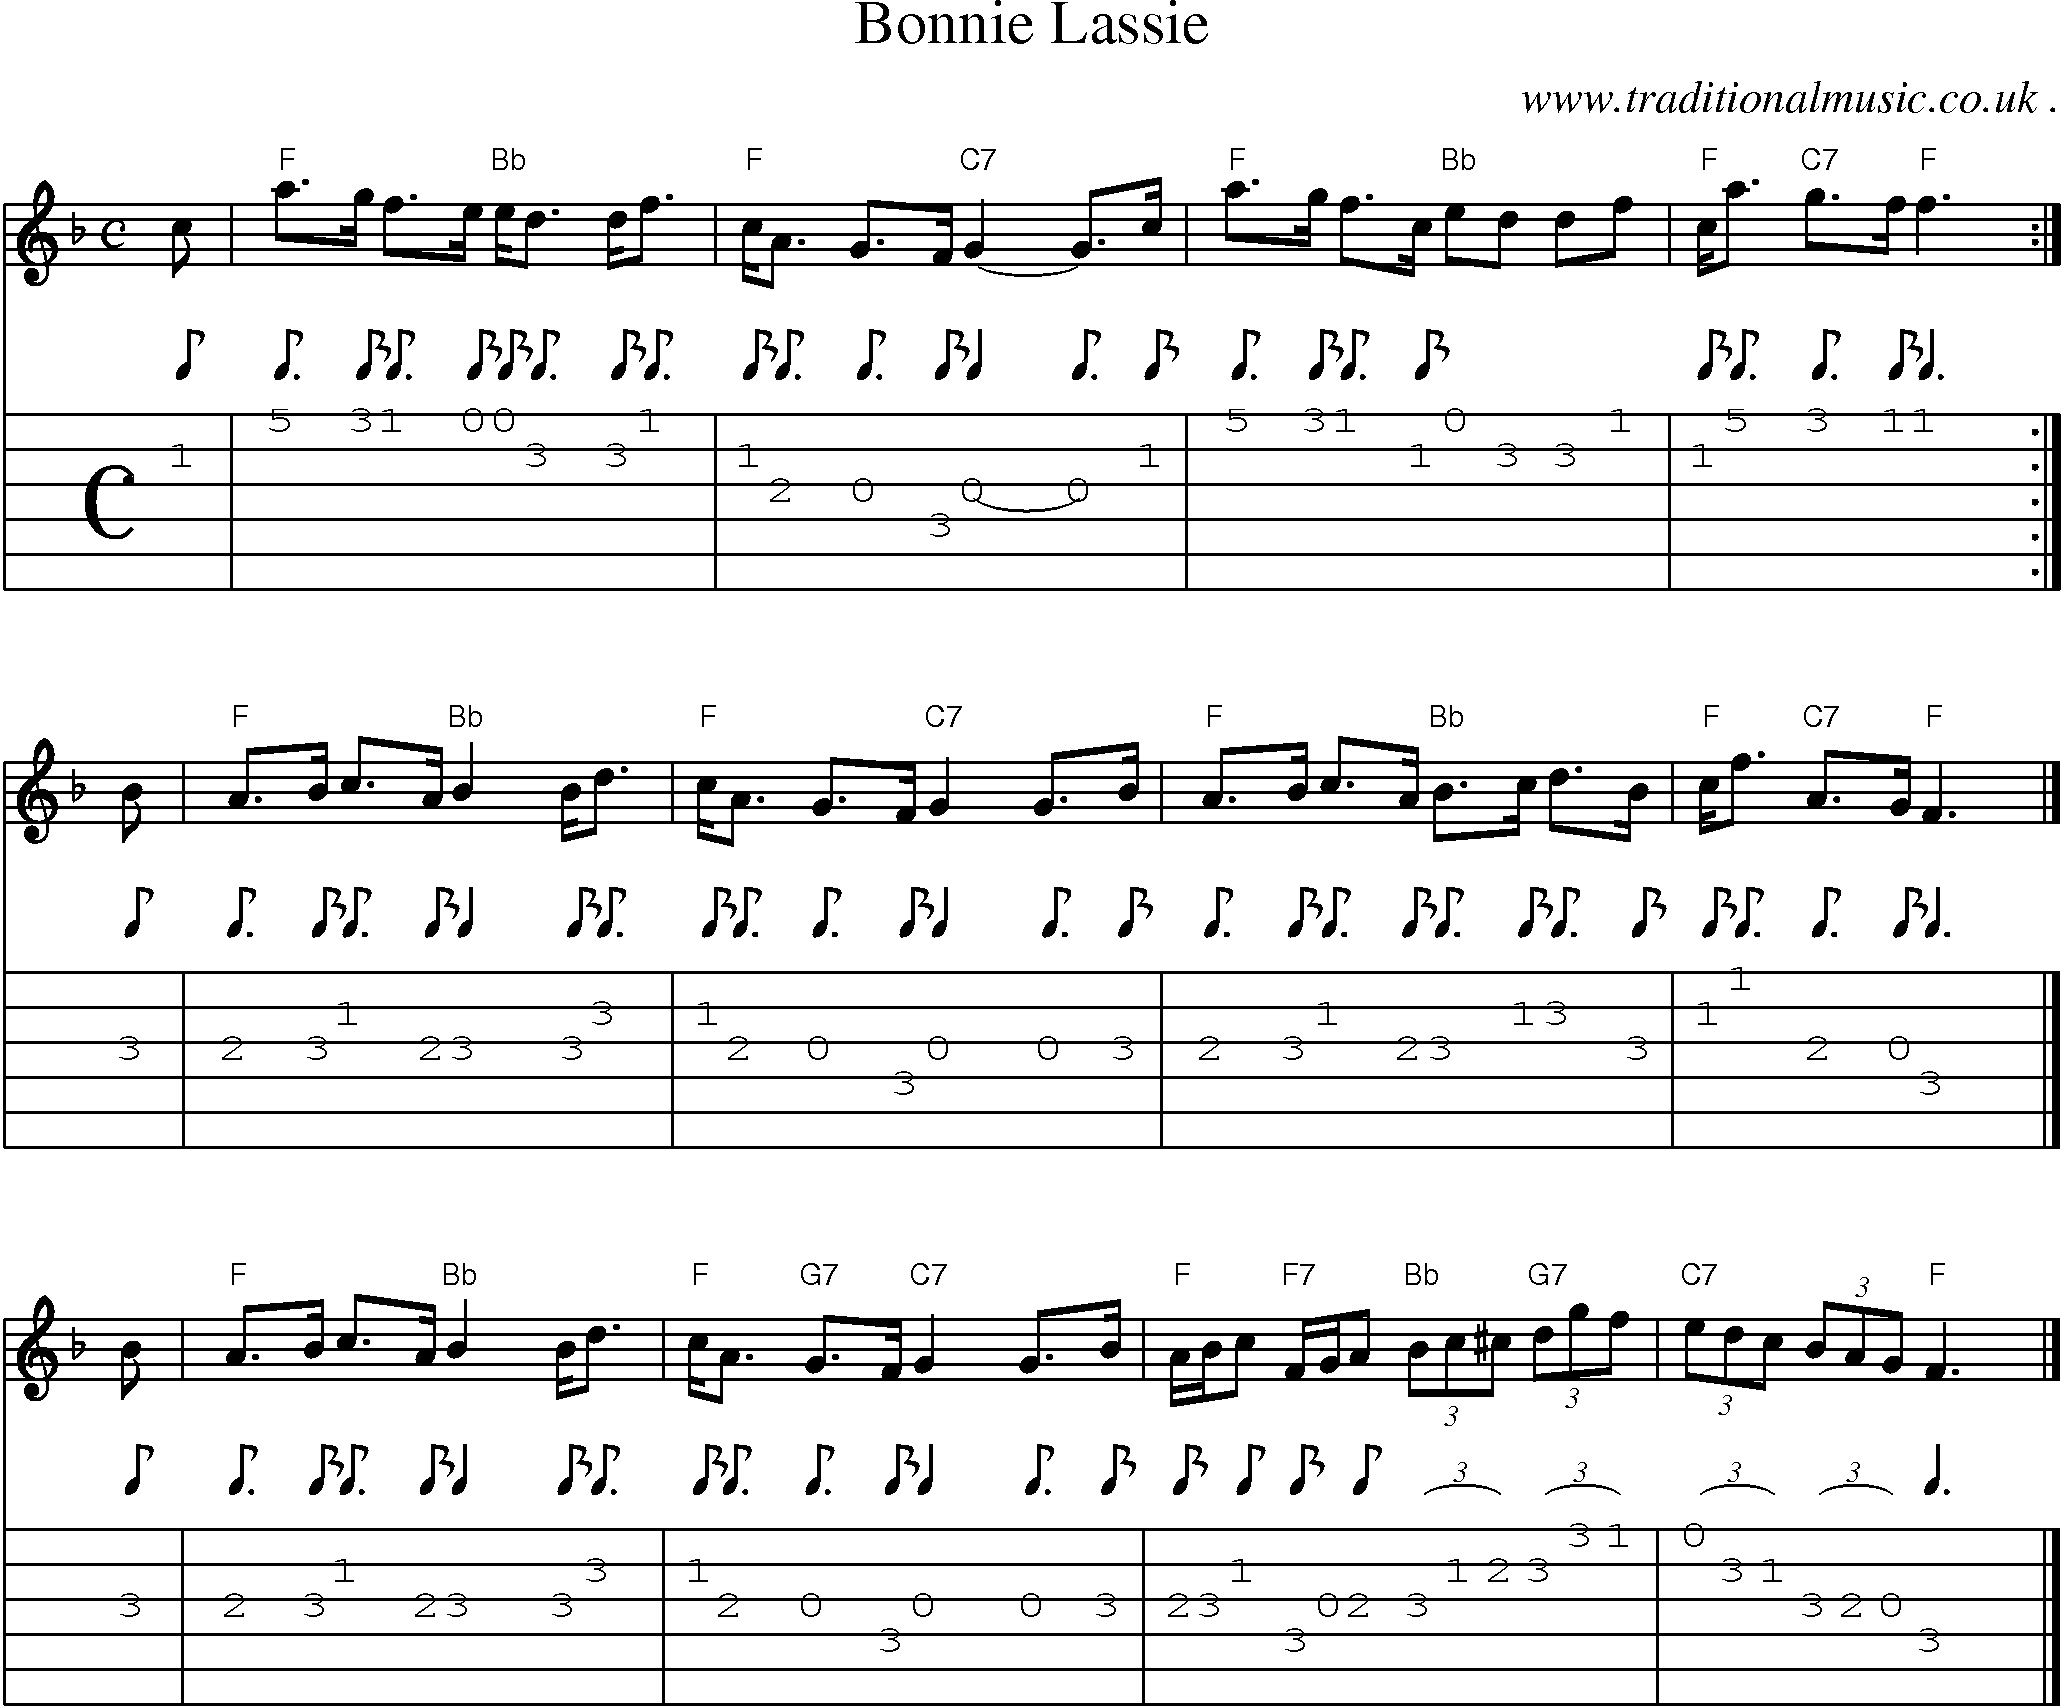 Sheet-music  score, Chords and Guitar Tabs for Bonnie Lassie